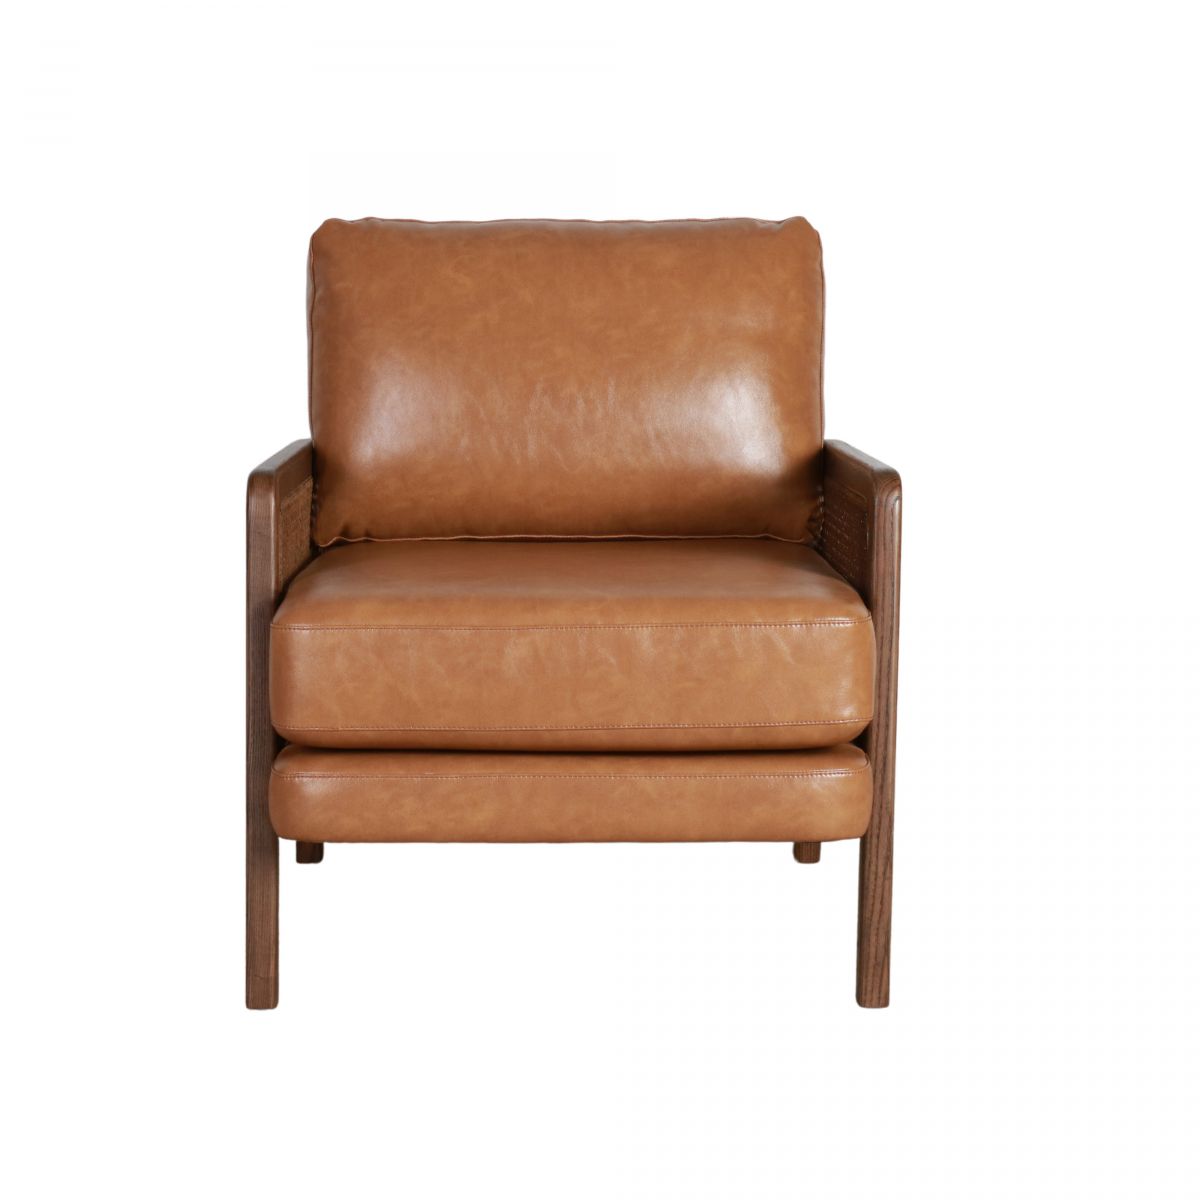 Modern armchair in leather with rattan inlay on arms